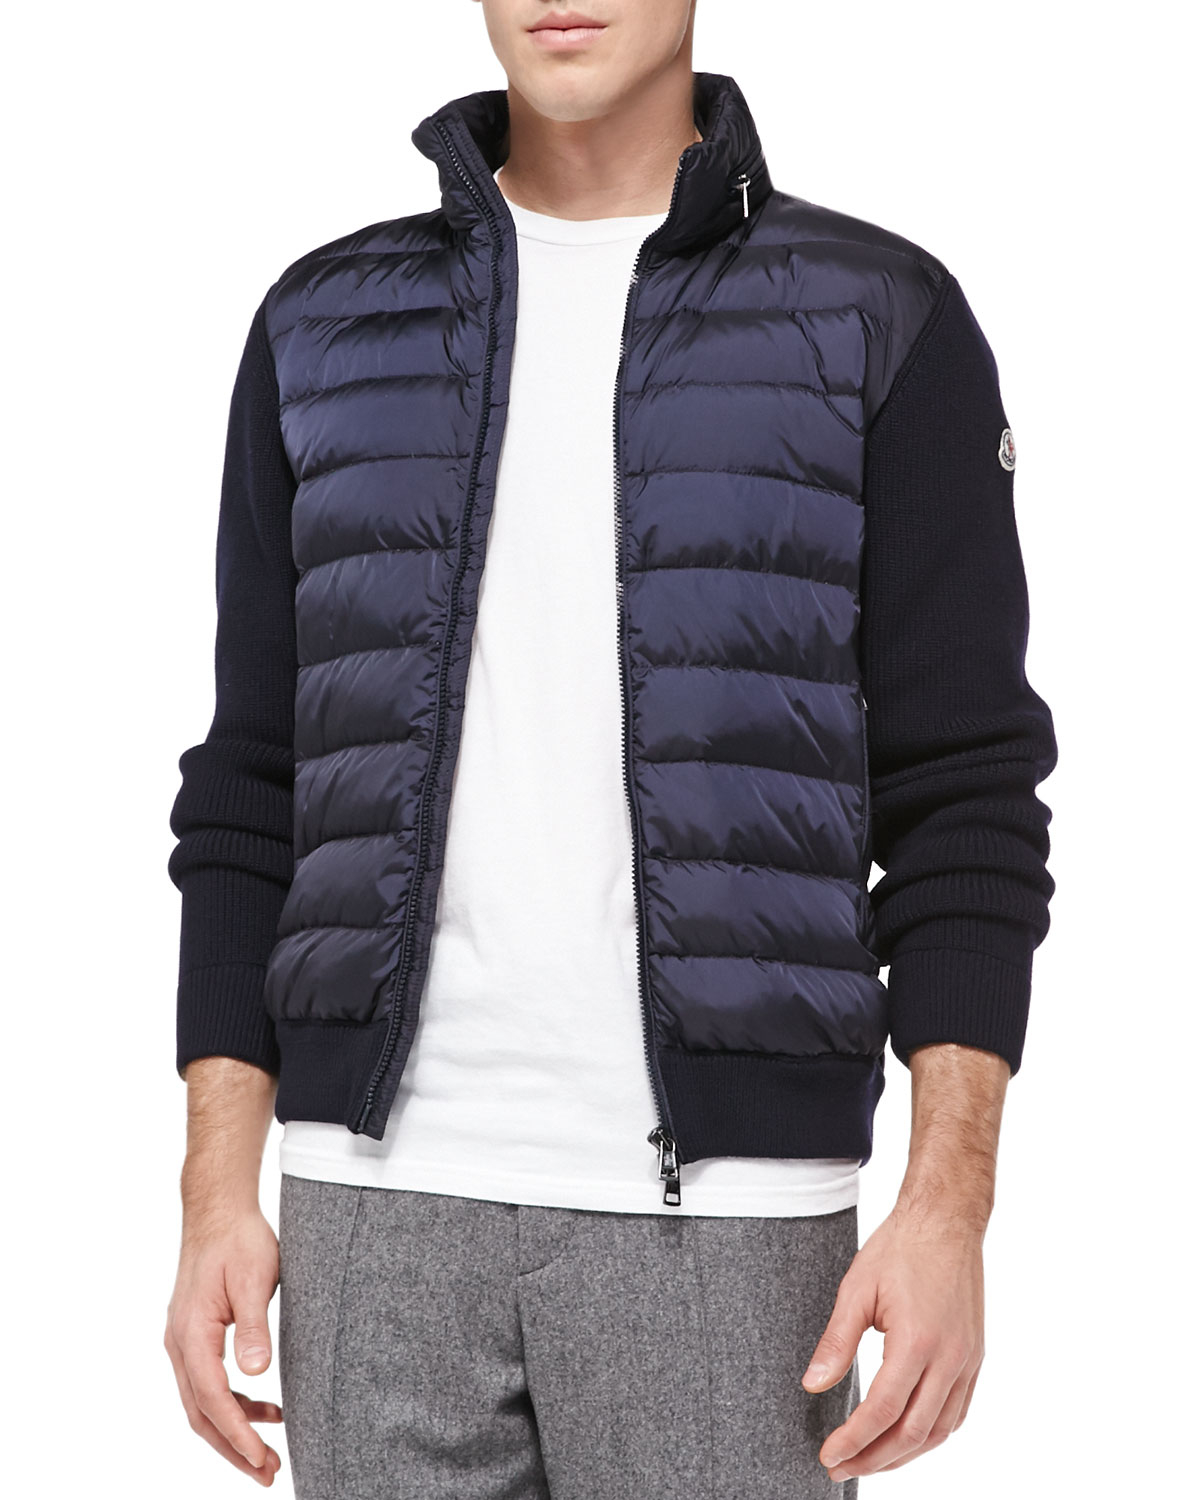 Moncler Padded Front Jacket Top Sellers, SAVE 45% - fearthemecca.com